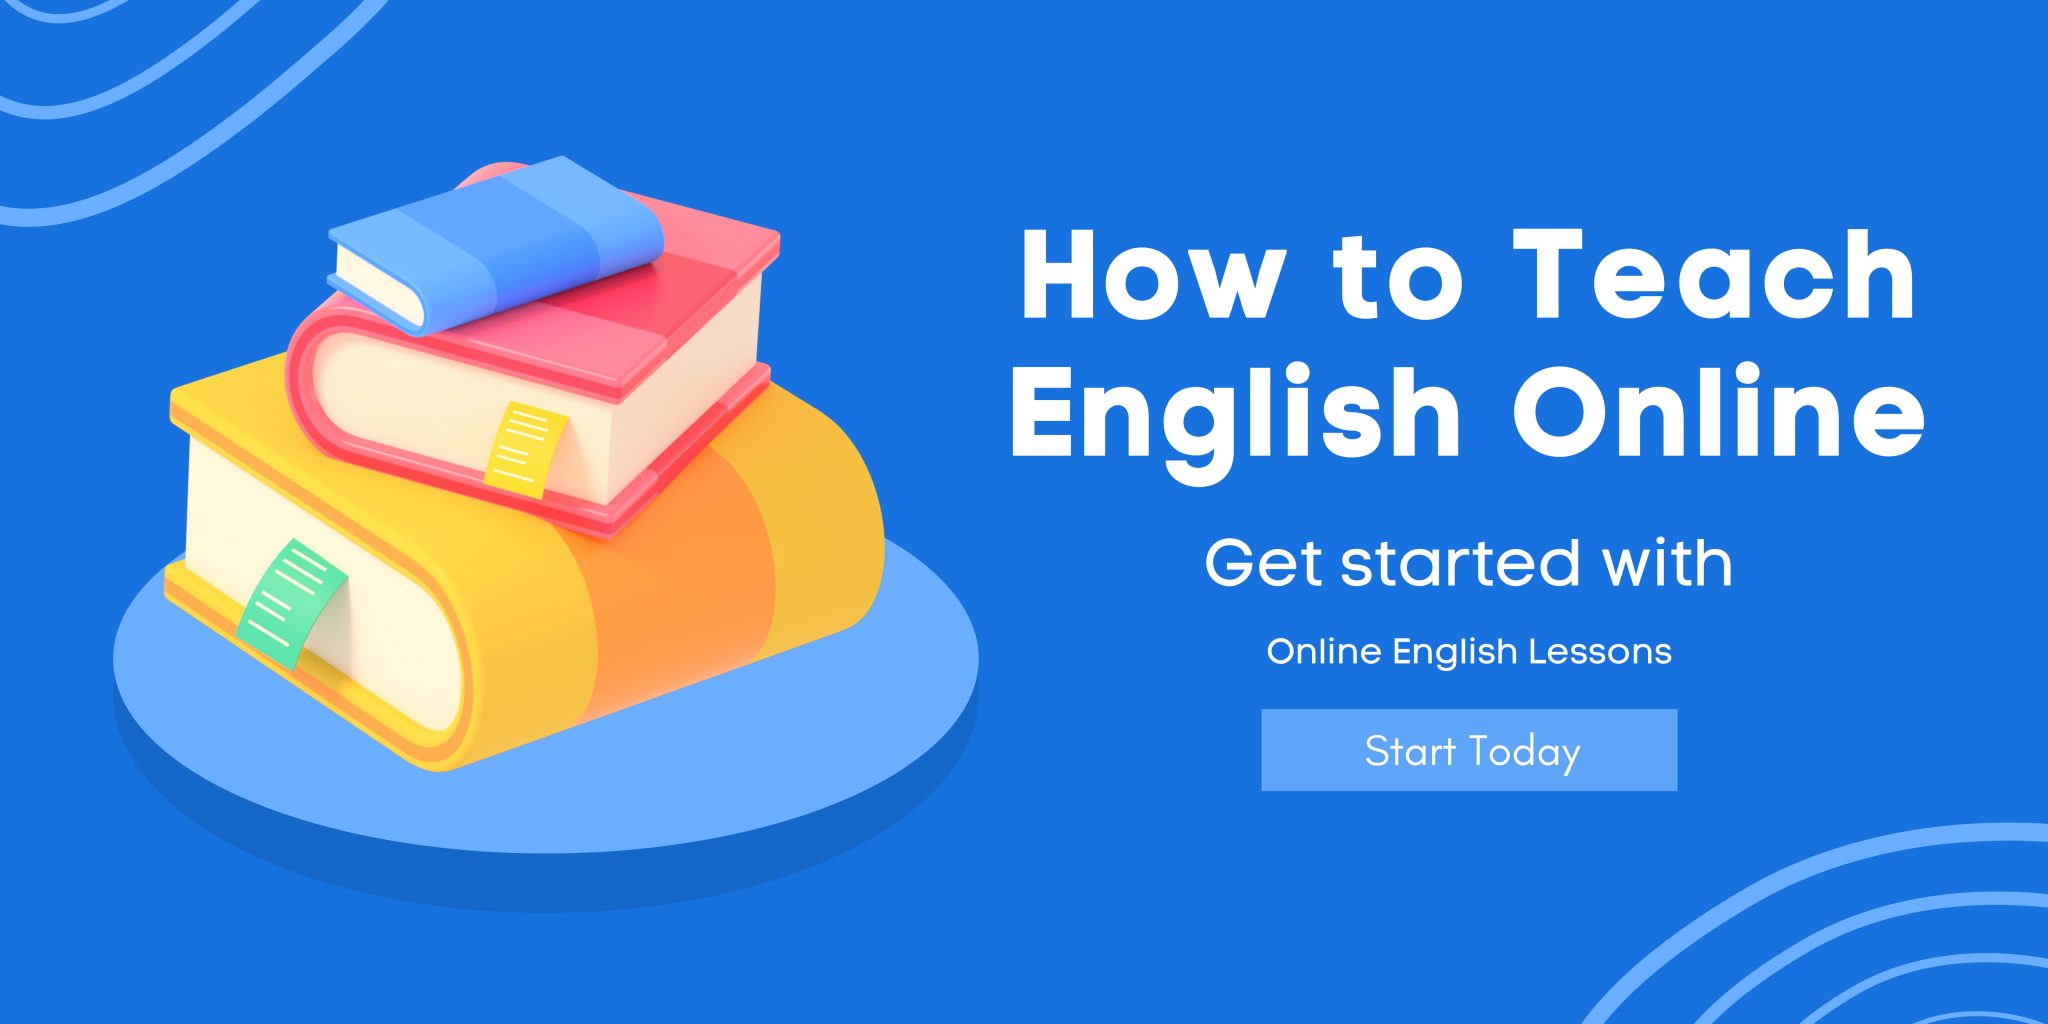 how-to-teach-english-online-guide-all-esl